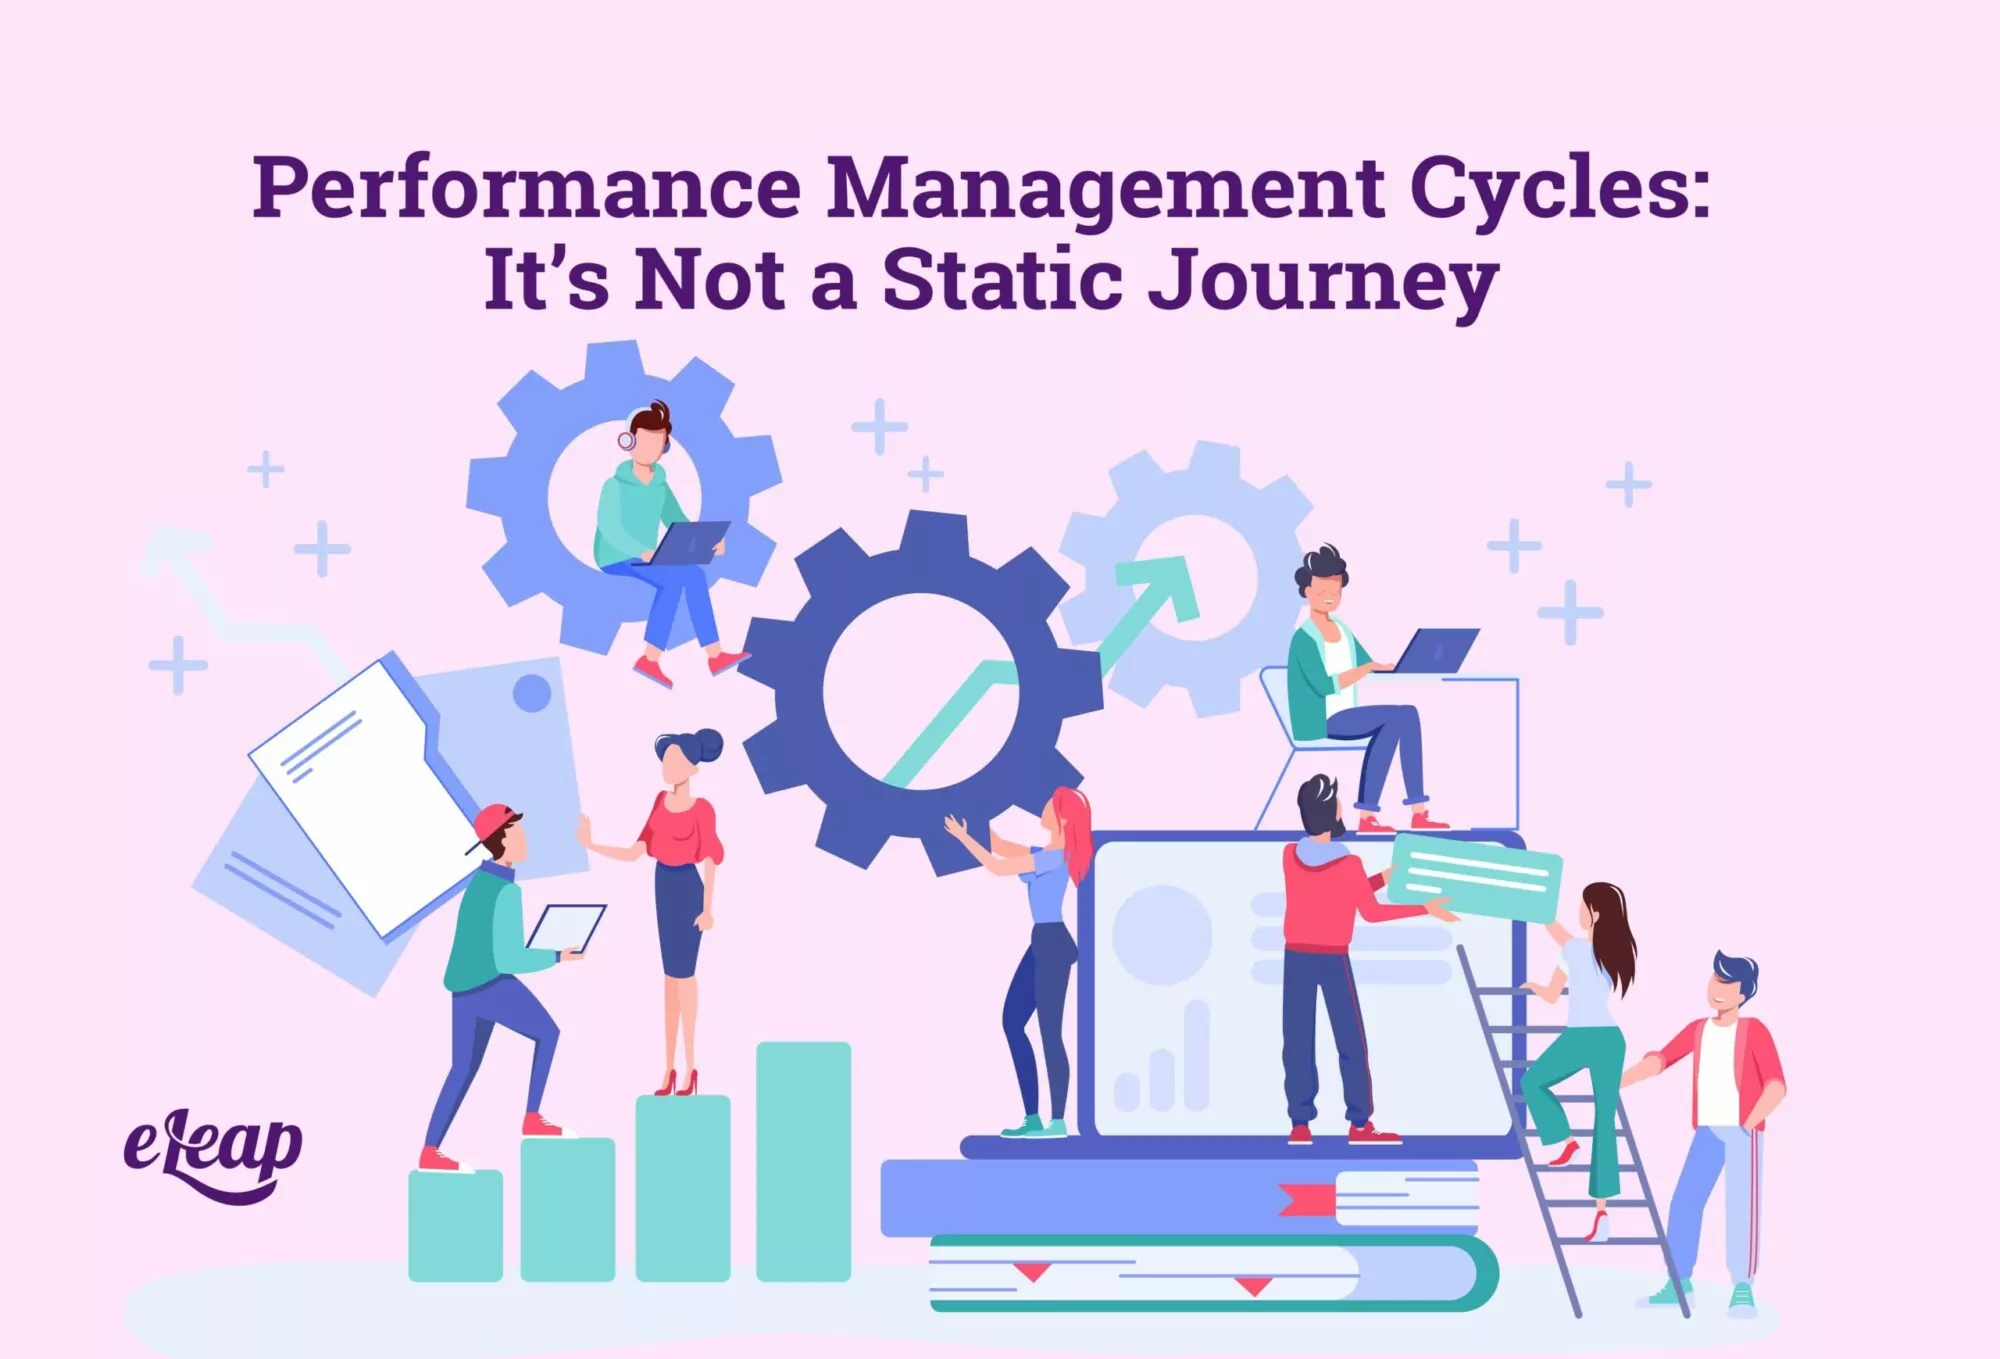 Performance Management Cycles: It’s Not a Static Journey